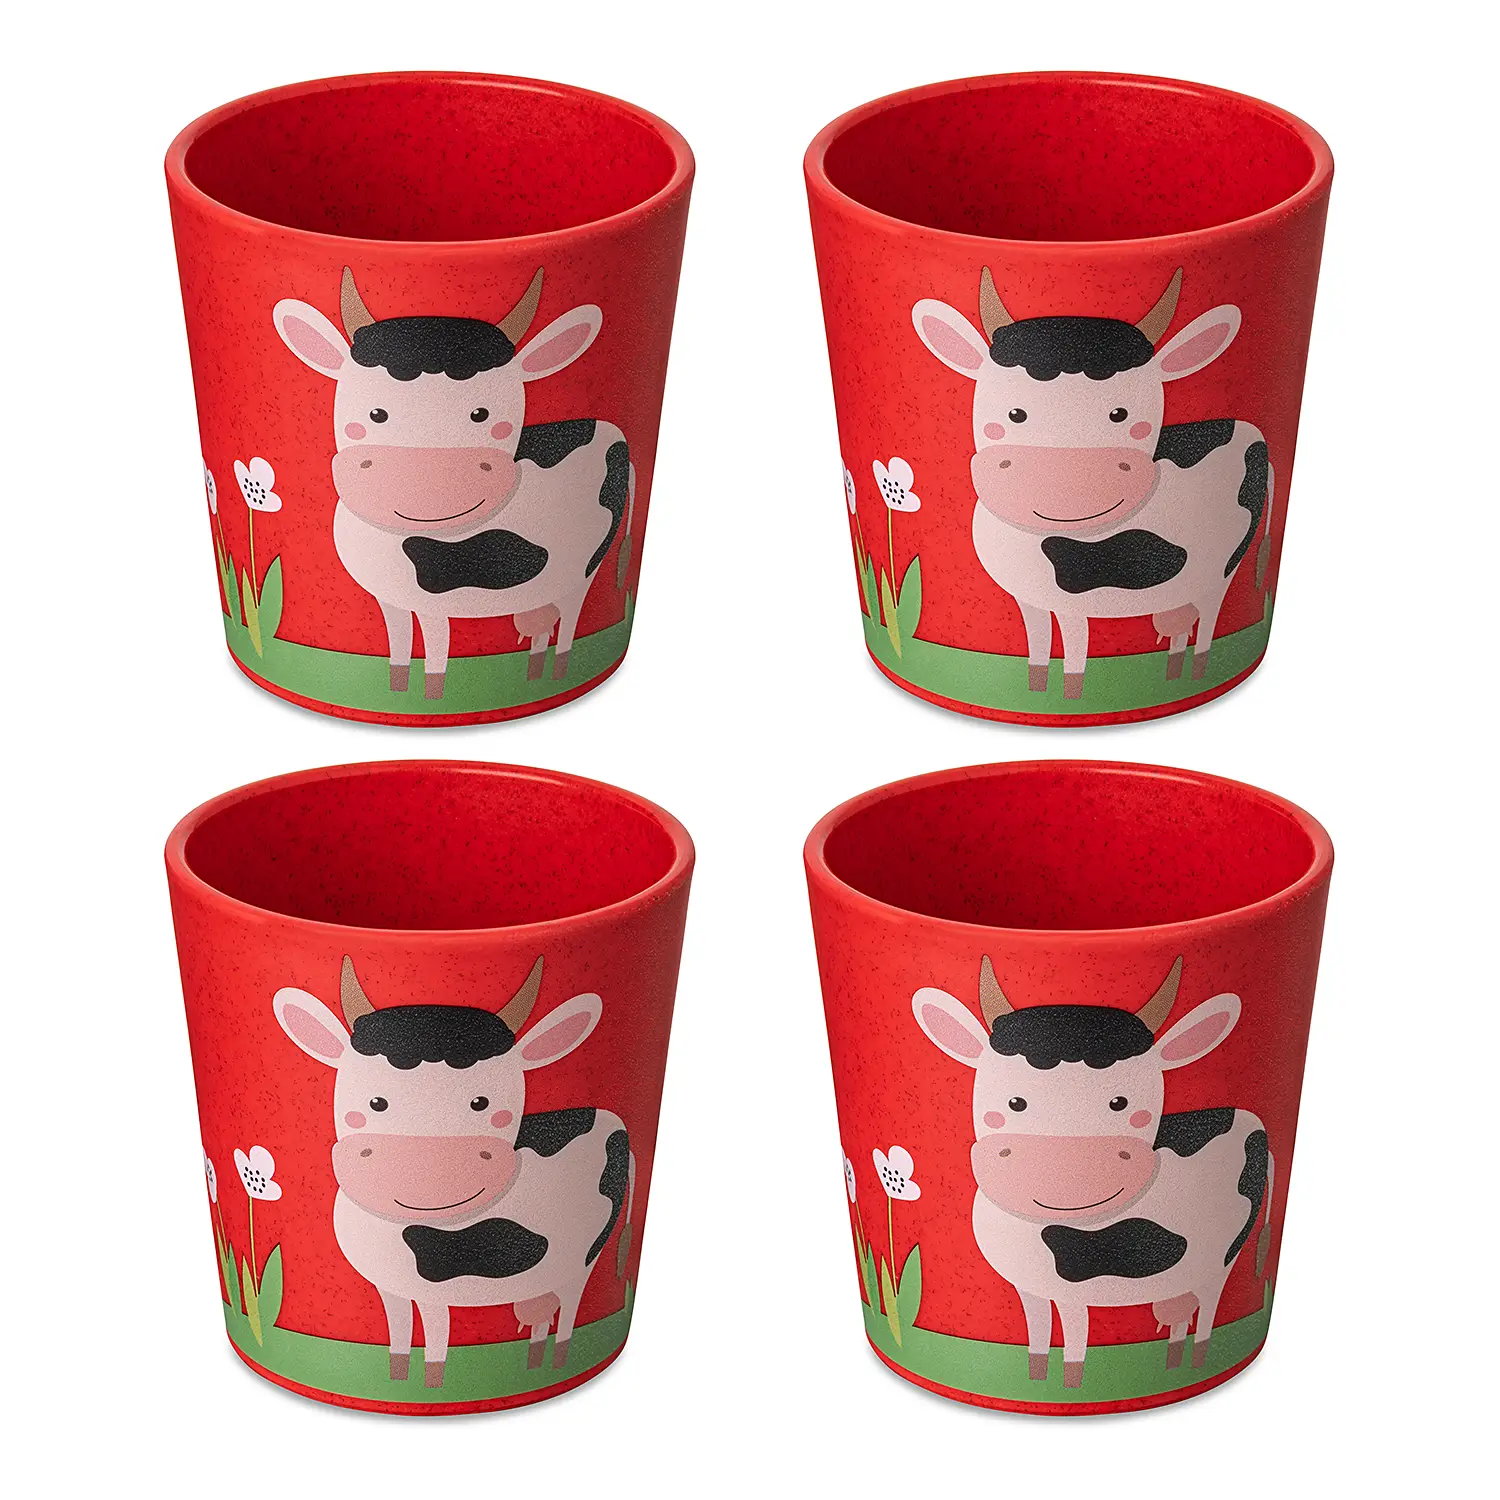 CONNECT (4-tlg.) S CUP FARM Becher